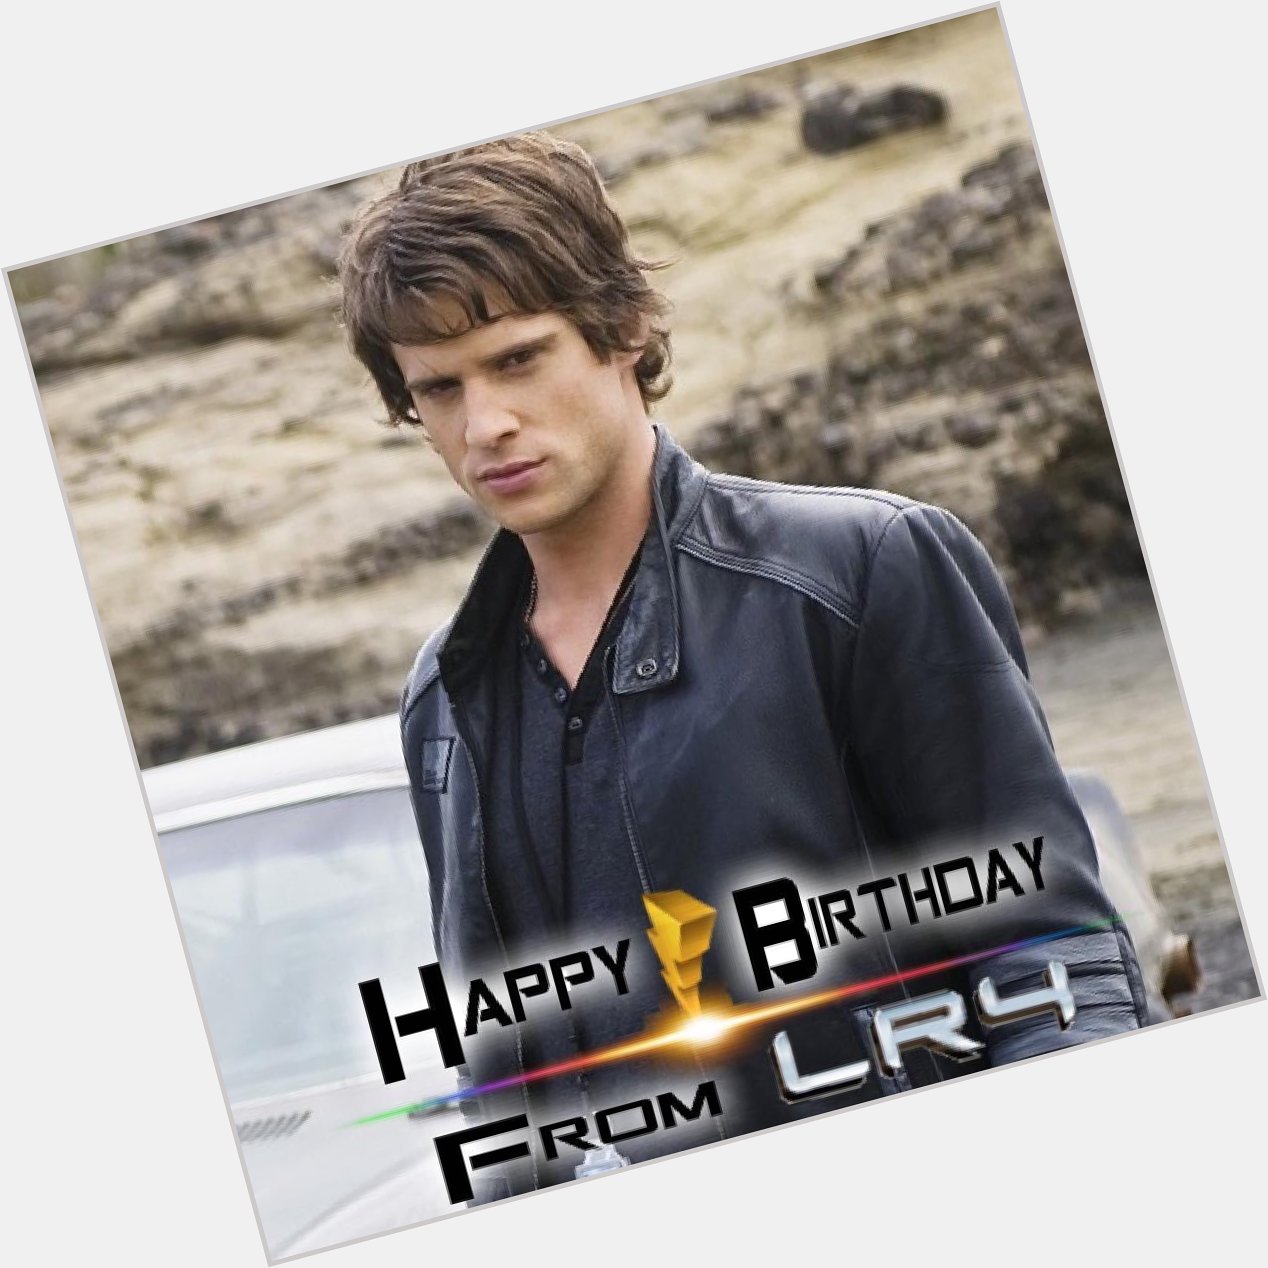 LR4 would also like to wish Dan Ewing a Happy Birthday! 